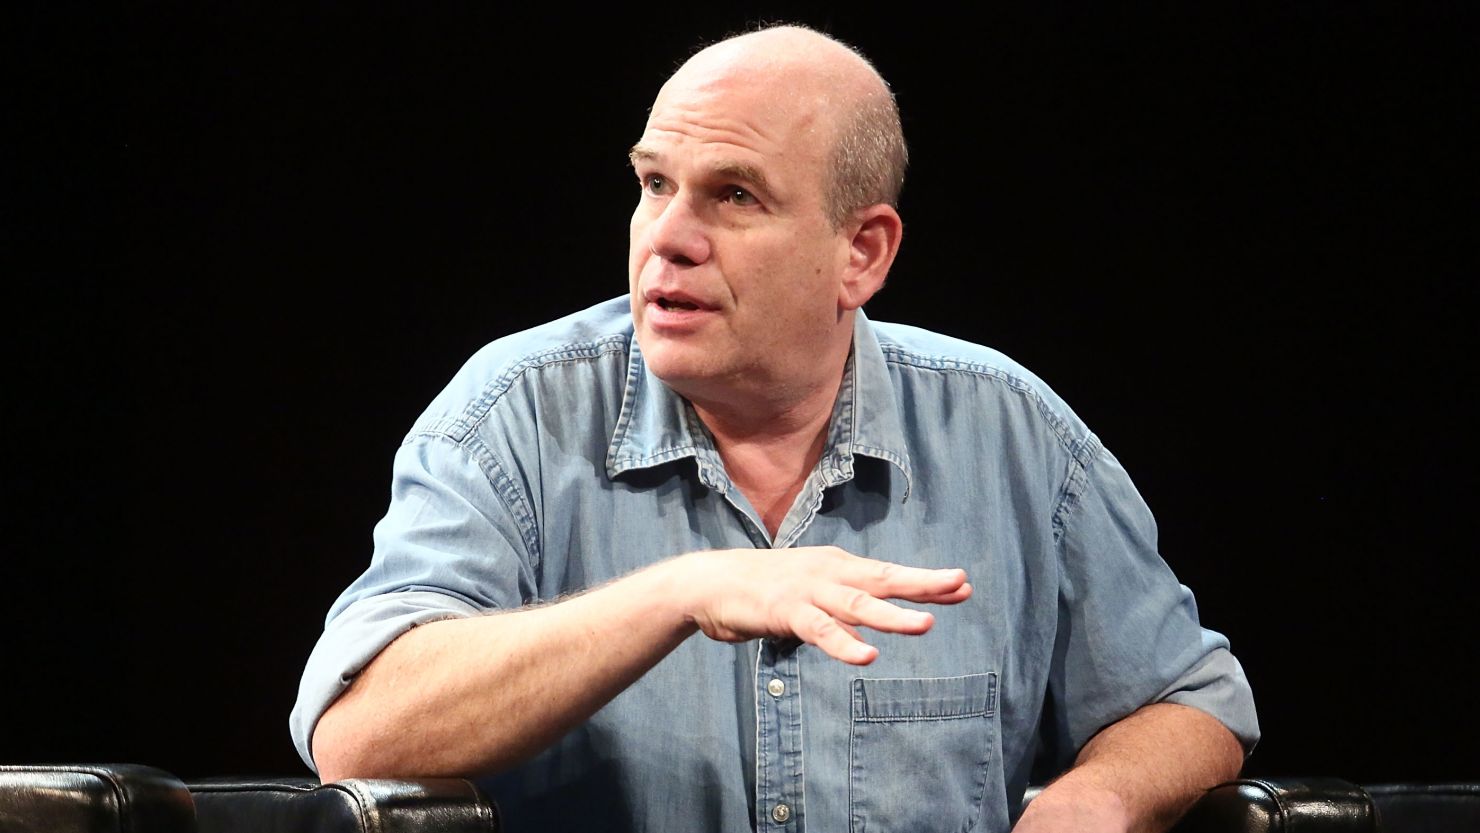 David Simon's new series will be about neighborhoods and politics in Yonkers, New York.